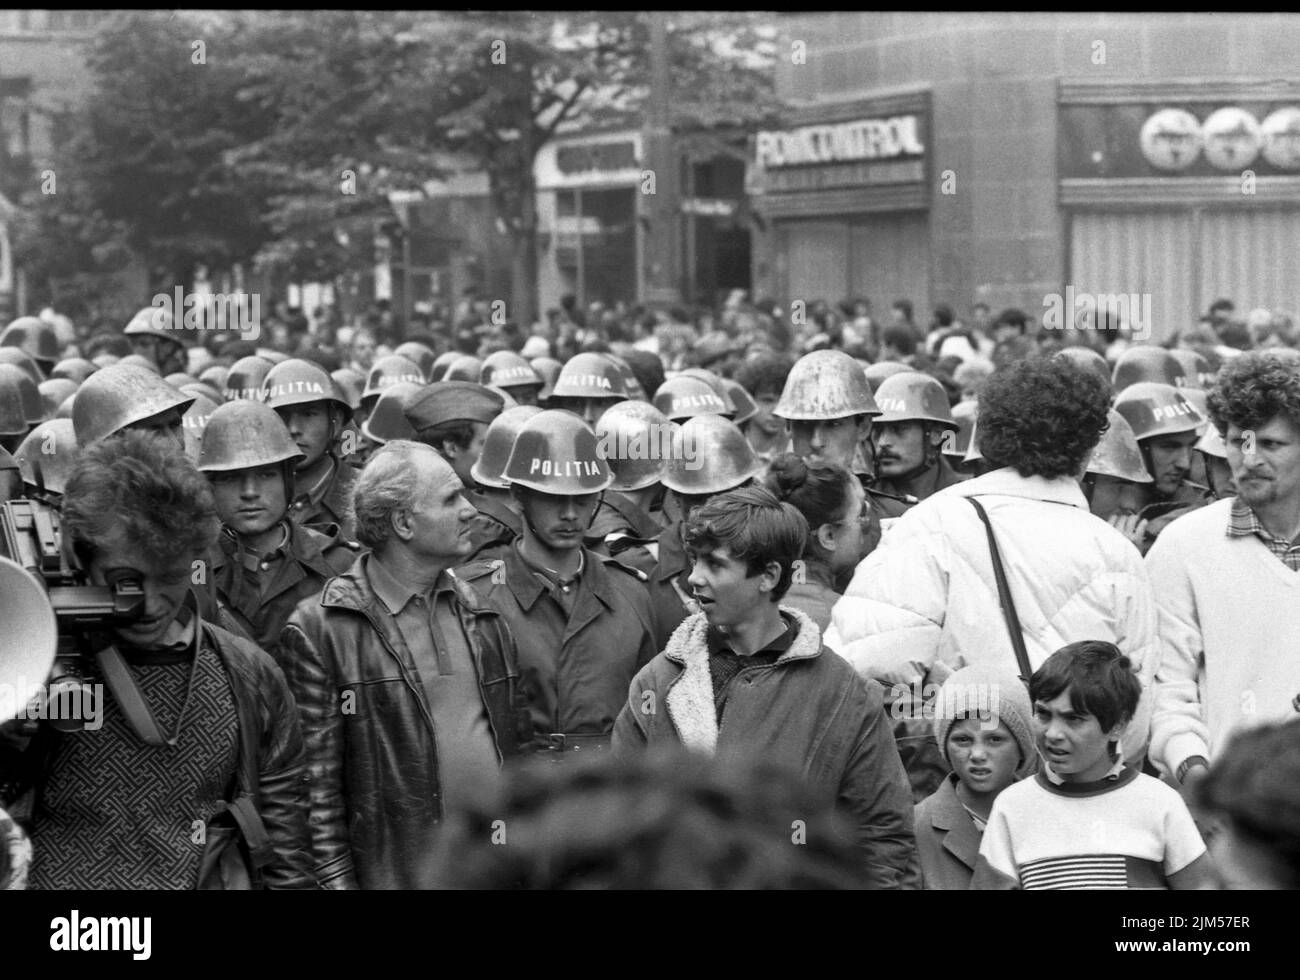 Bucharest, Romania, May 1990. Police forces during 'Golaniada', a major anti-communism protest  in the University Square following the Romanian Revolution of 1989. People would gather daily to protest the ex-communists that took the power after the Revolution. Stock Photo